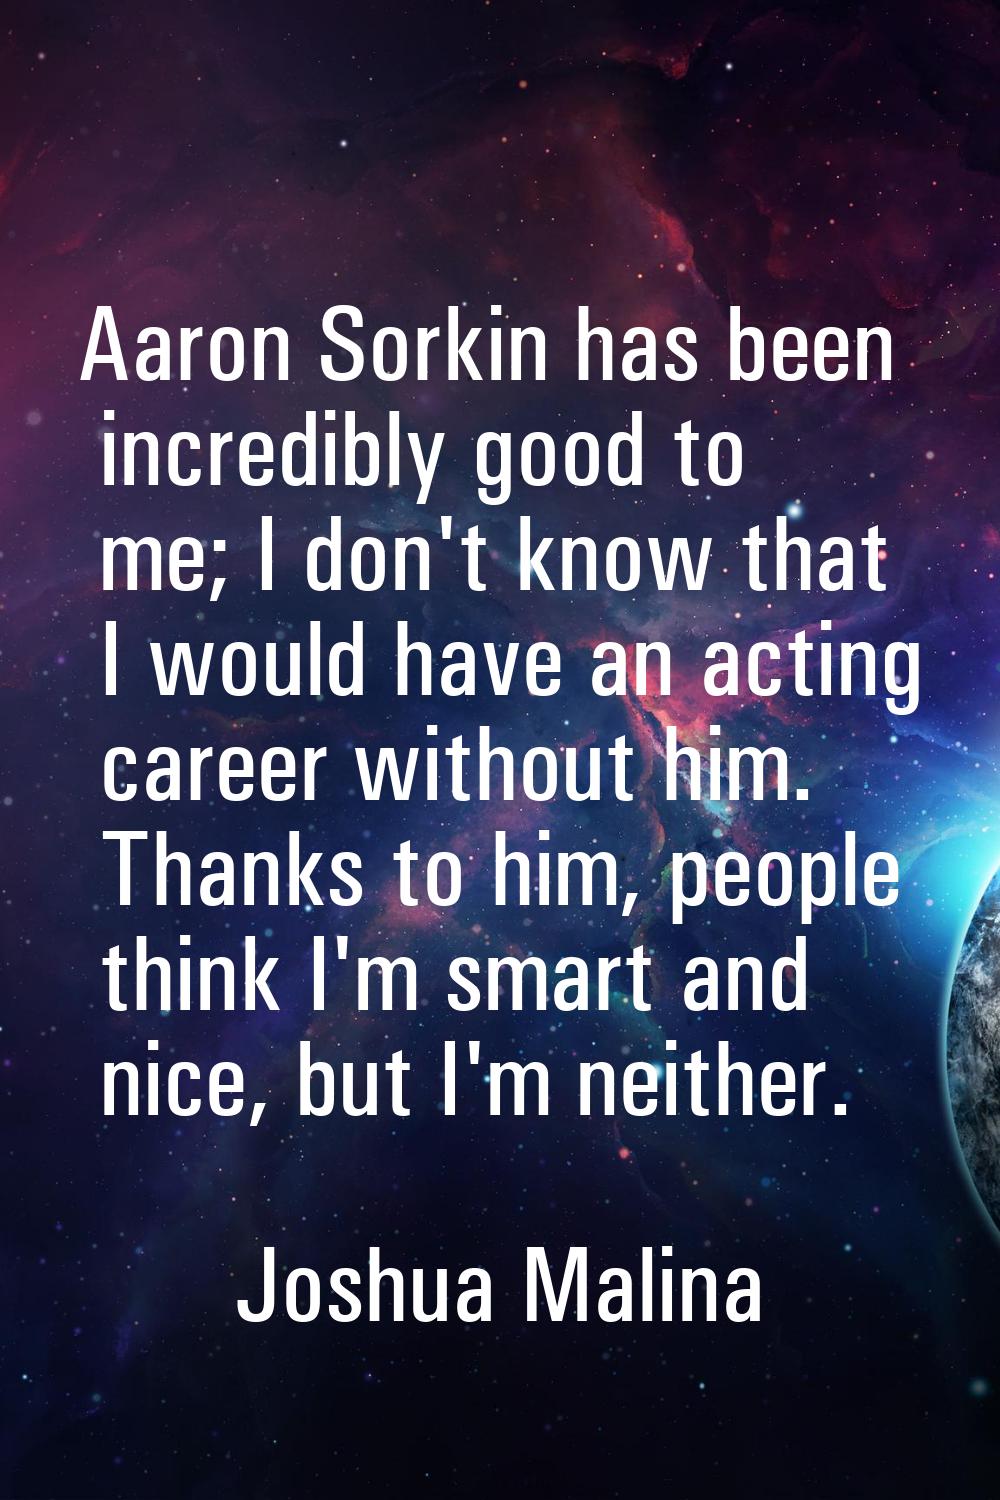 Aaron Sorkin has been incredibly good to me; I don't know that I would have an acting career withou